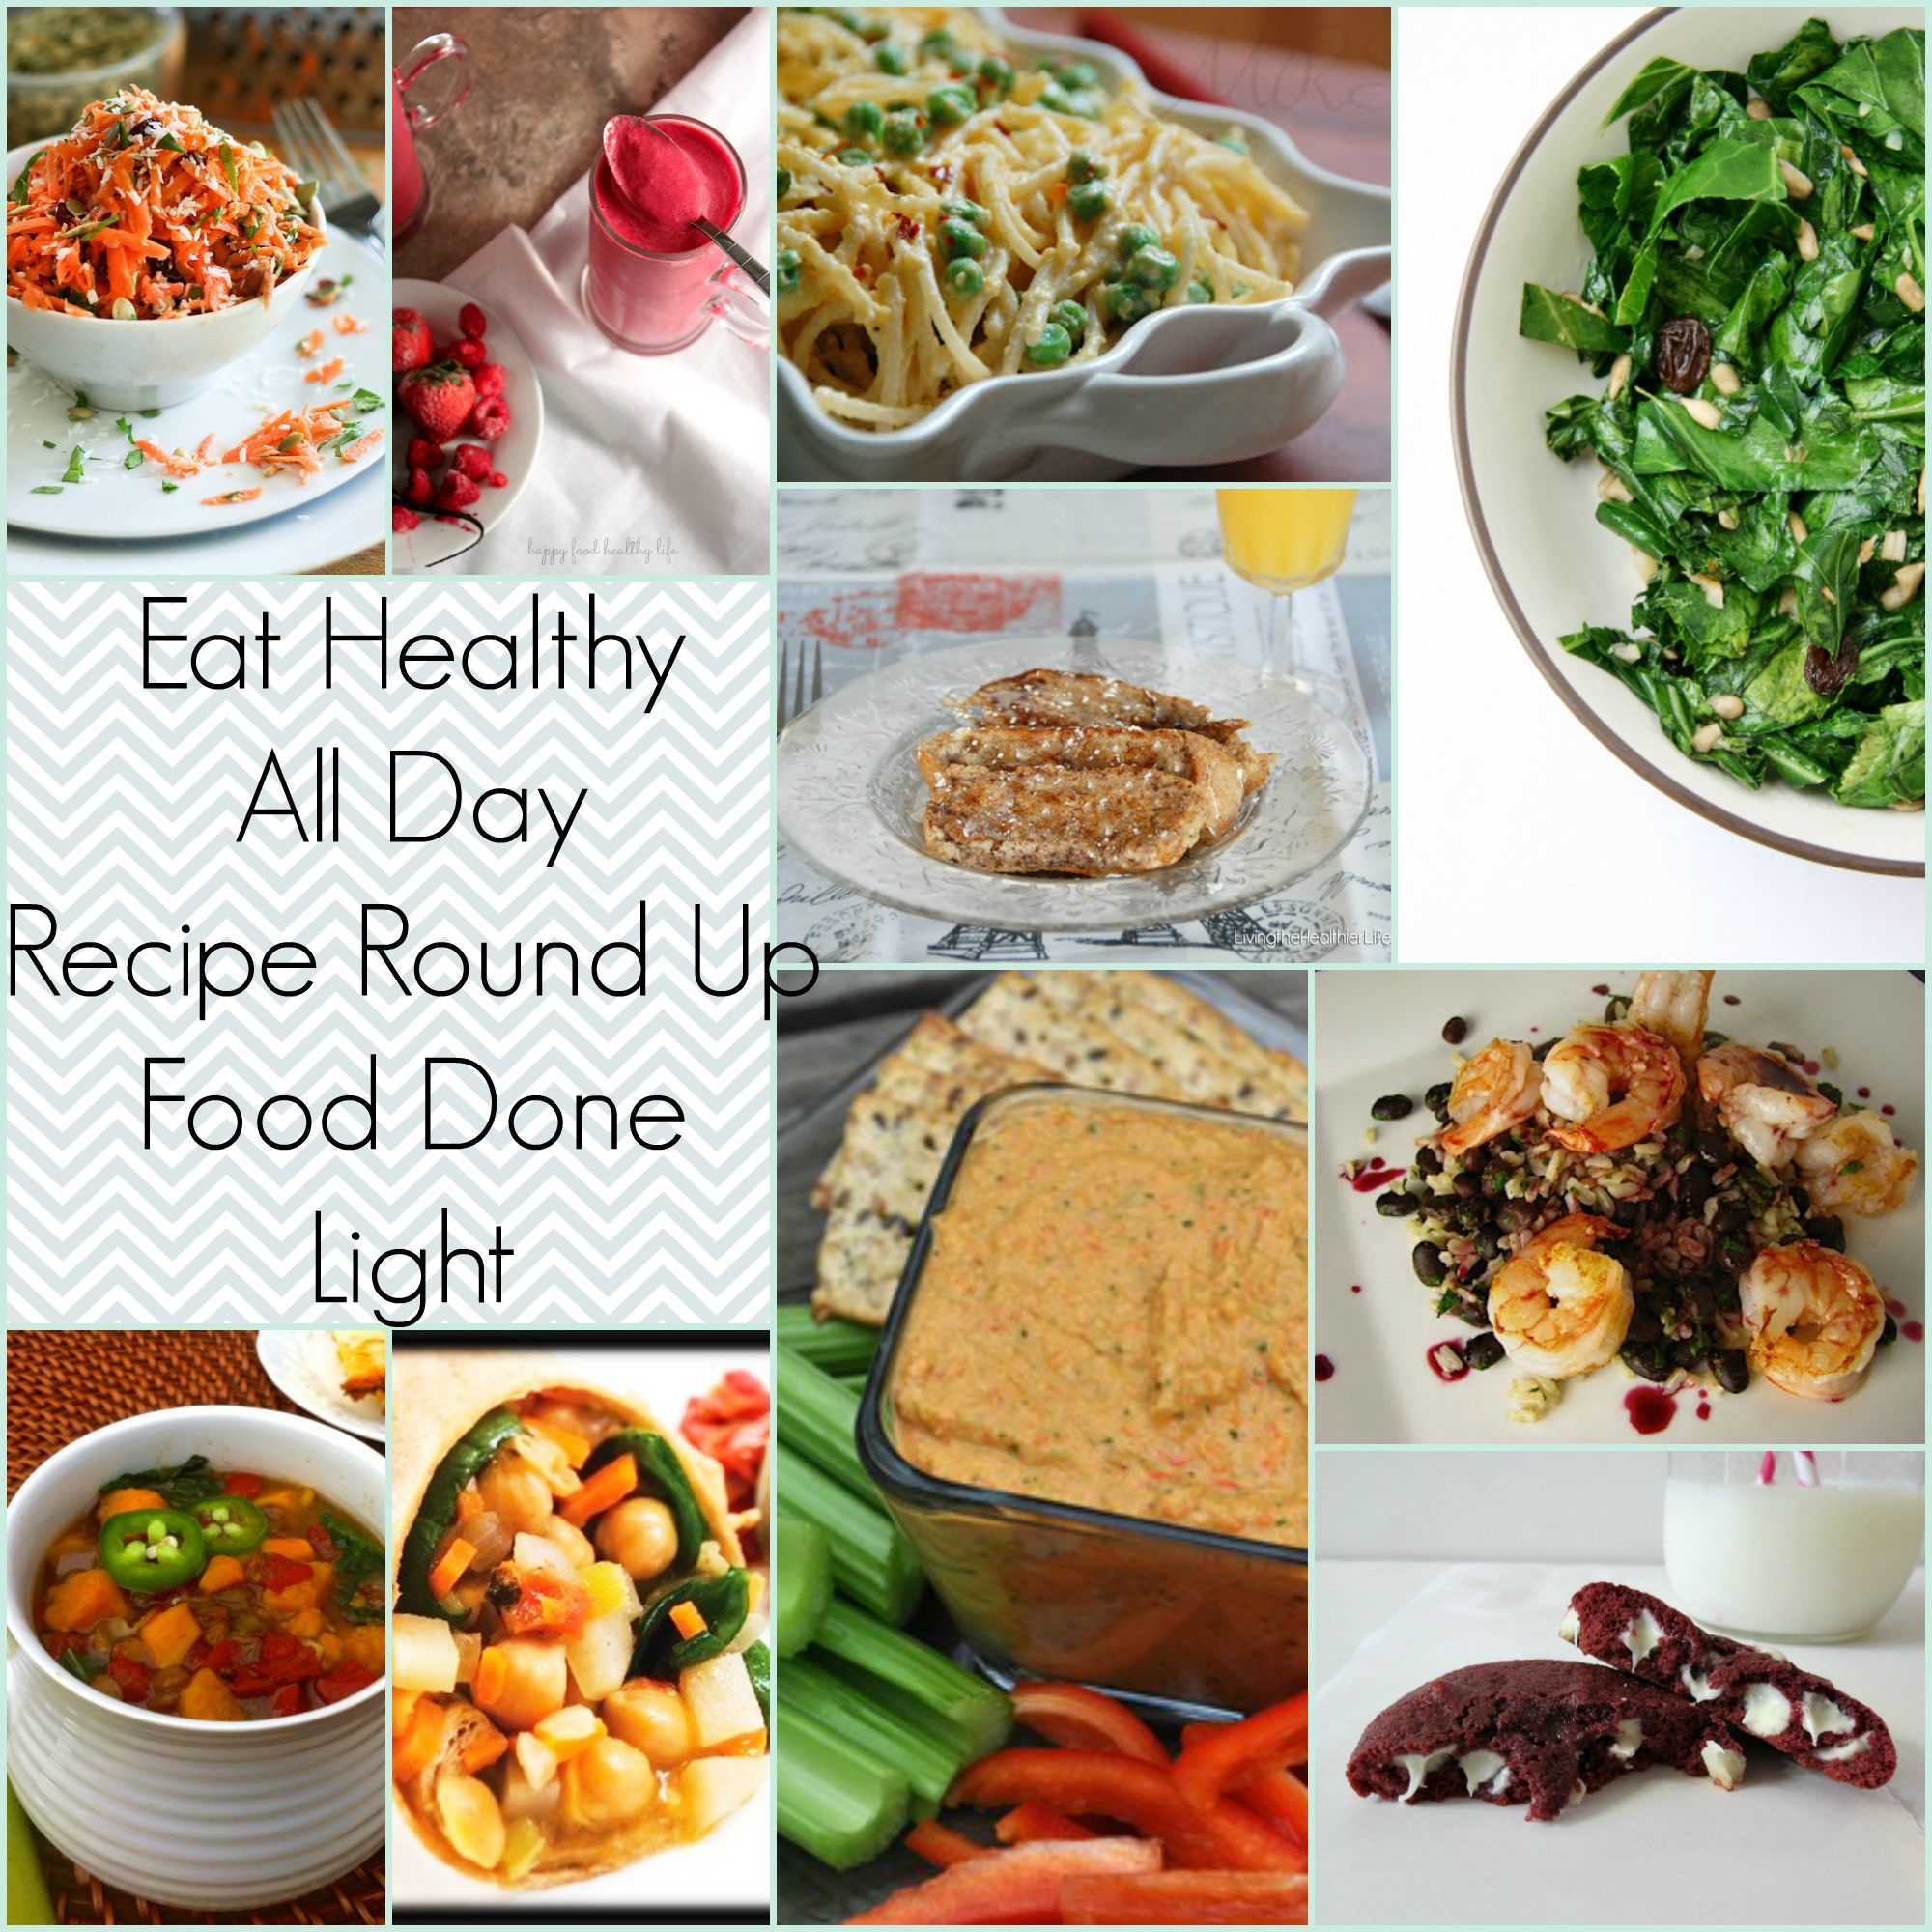 Healthy Foods For Breakfast Lunch And Dinner
 Eat Healthy All Day Recipe Round Up